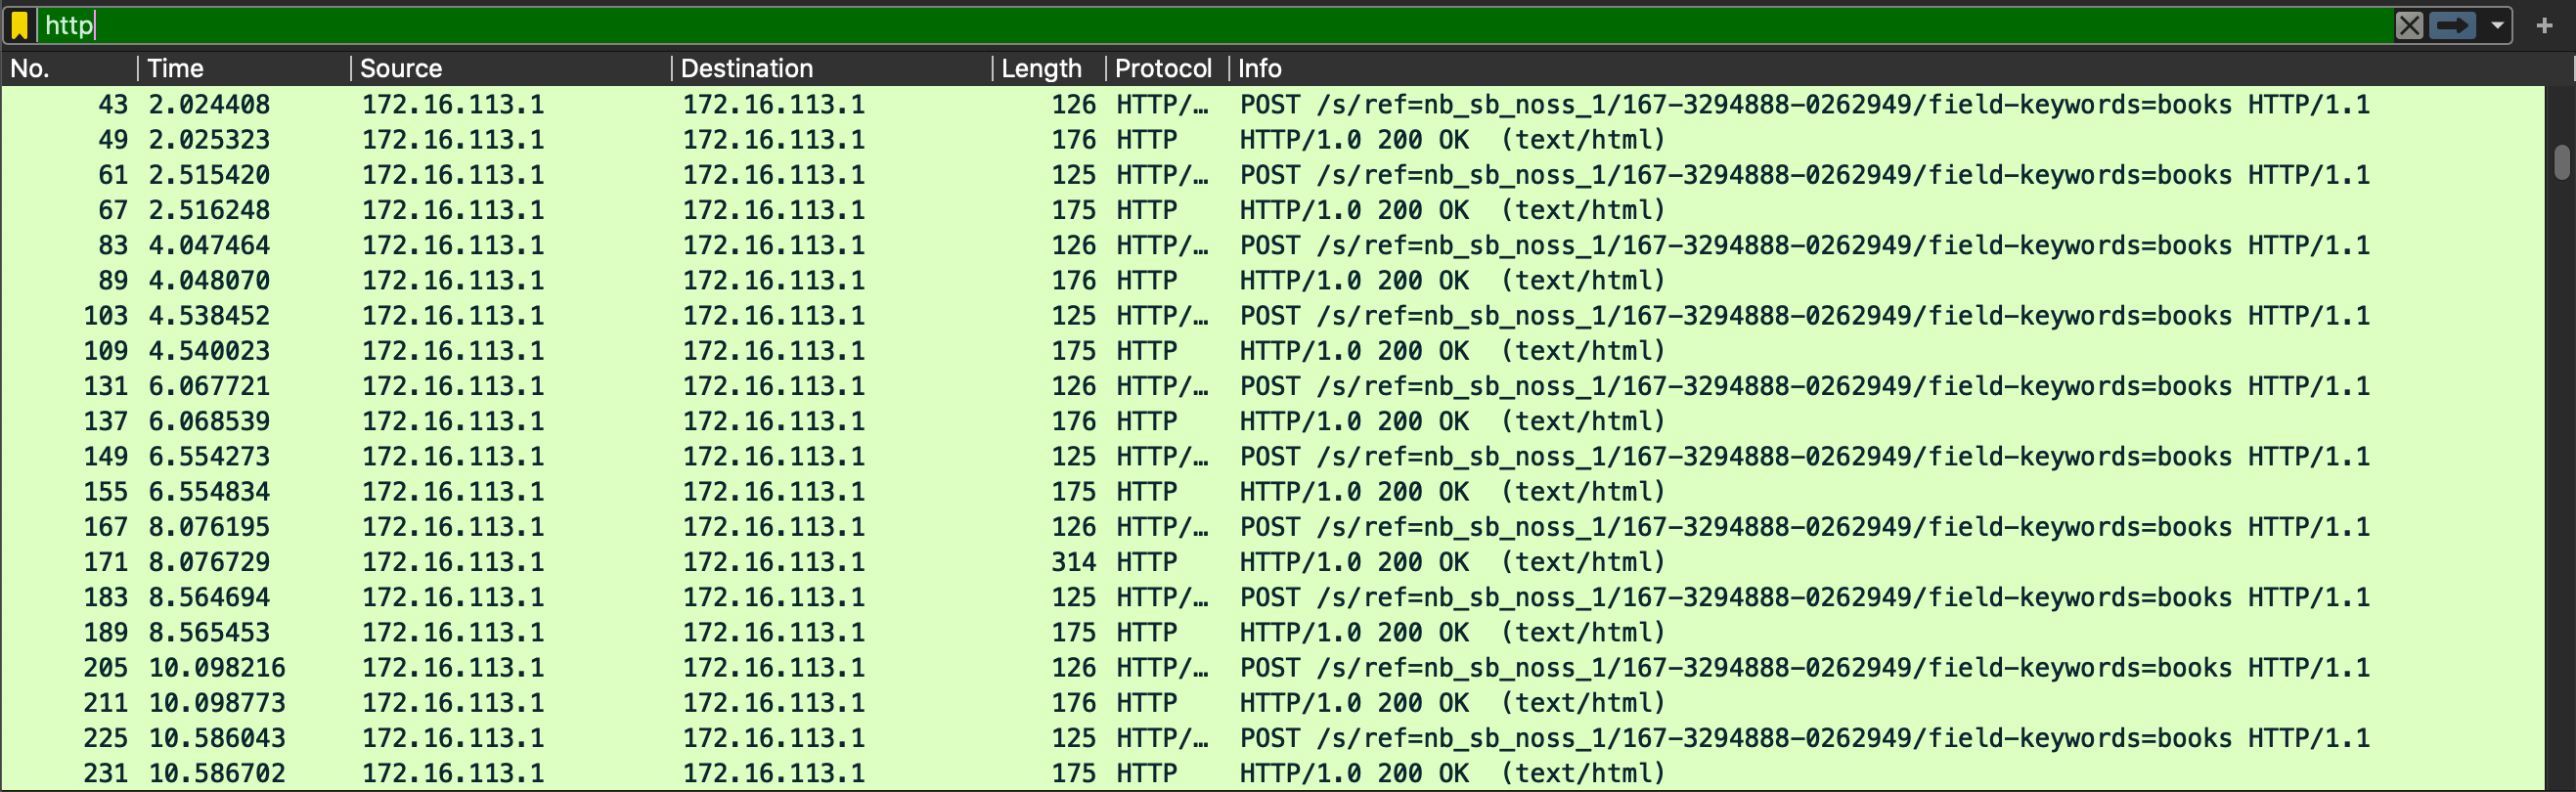 Potentially suspect HTTP traffic? I don't know, you tell me...